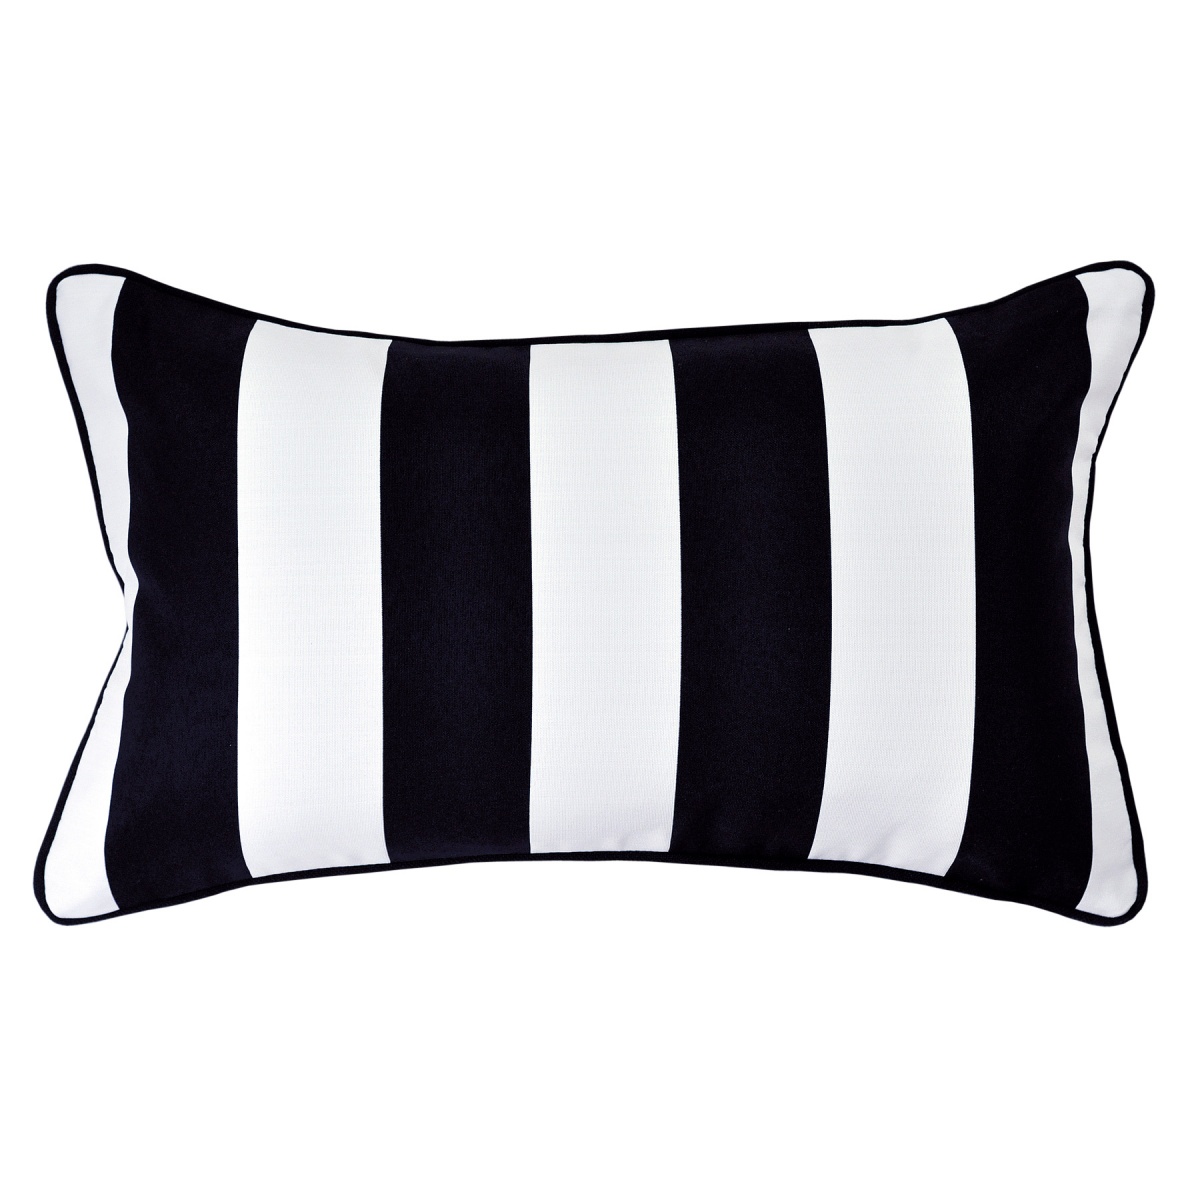 Mallacoota Ash Outdoor Cushion with Black Piping - 30x50cm